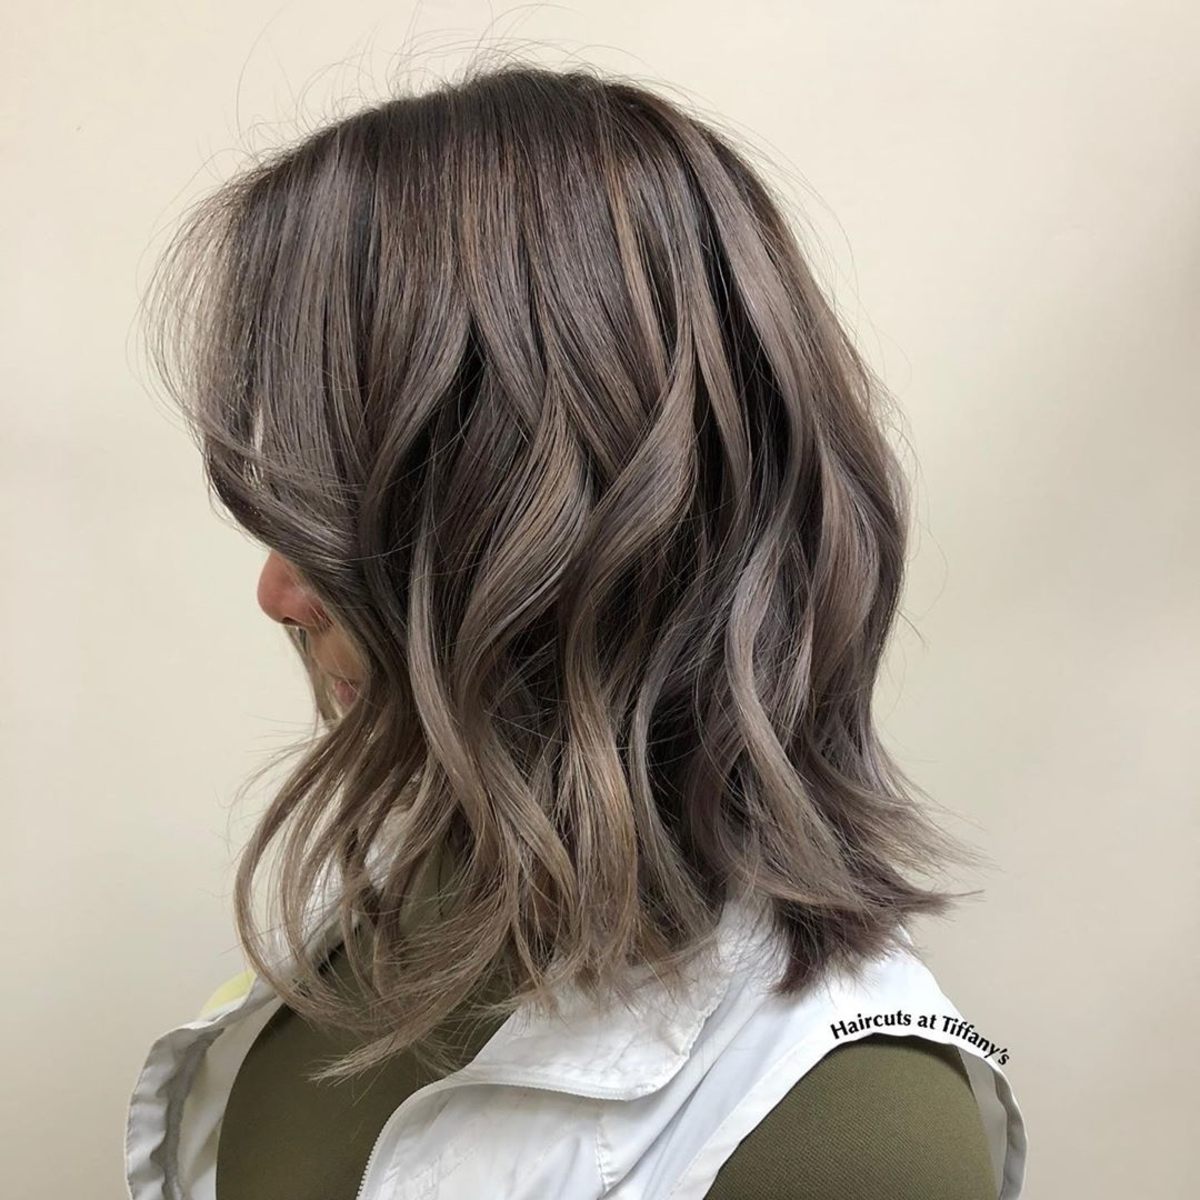 15 Perfect Examples of Light Ash Brown Hair Color